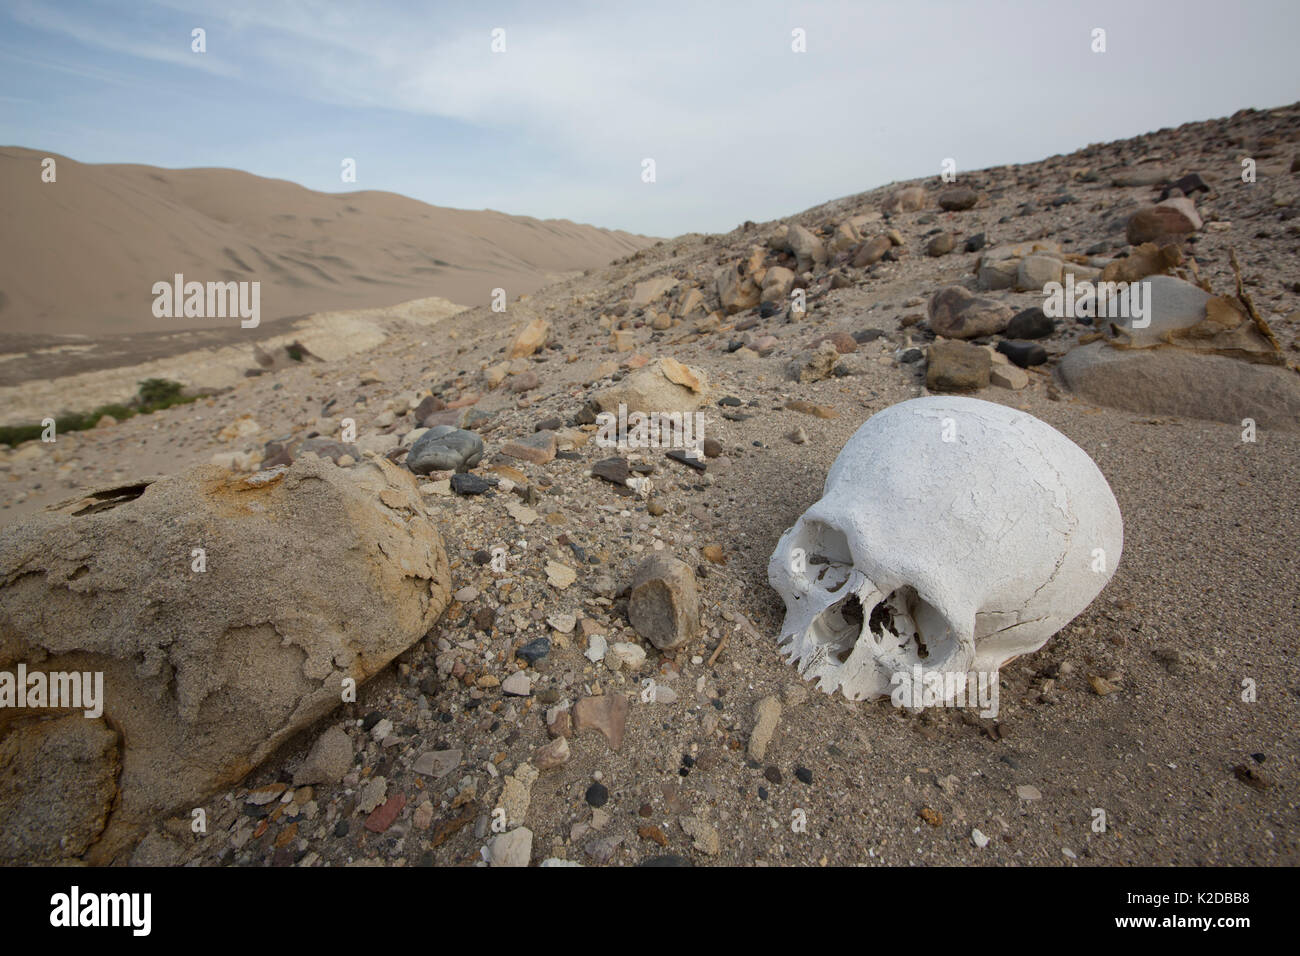 Human skull exposed where a  pre-Inca burial site has been pillaged,  Poroma Valley, Peru 2013 Stock Photo